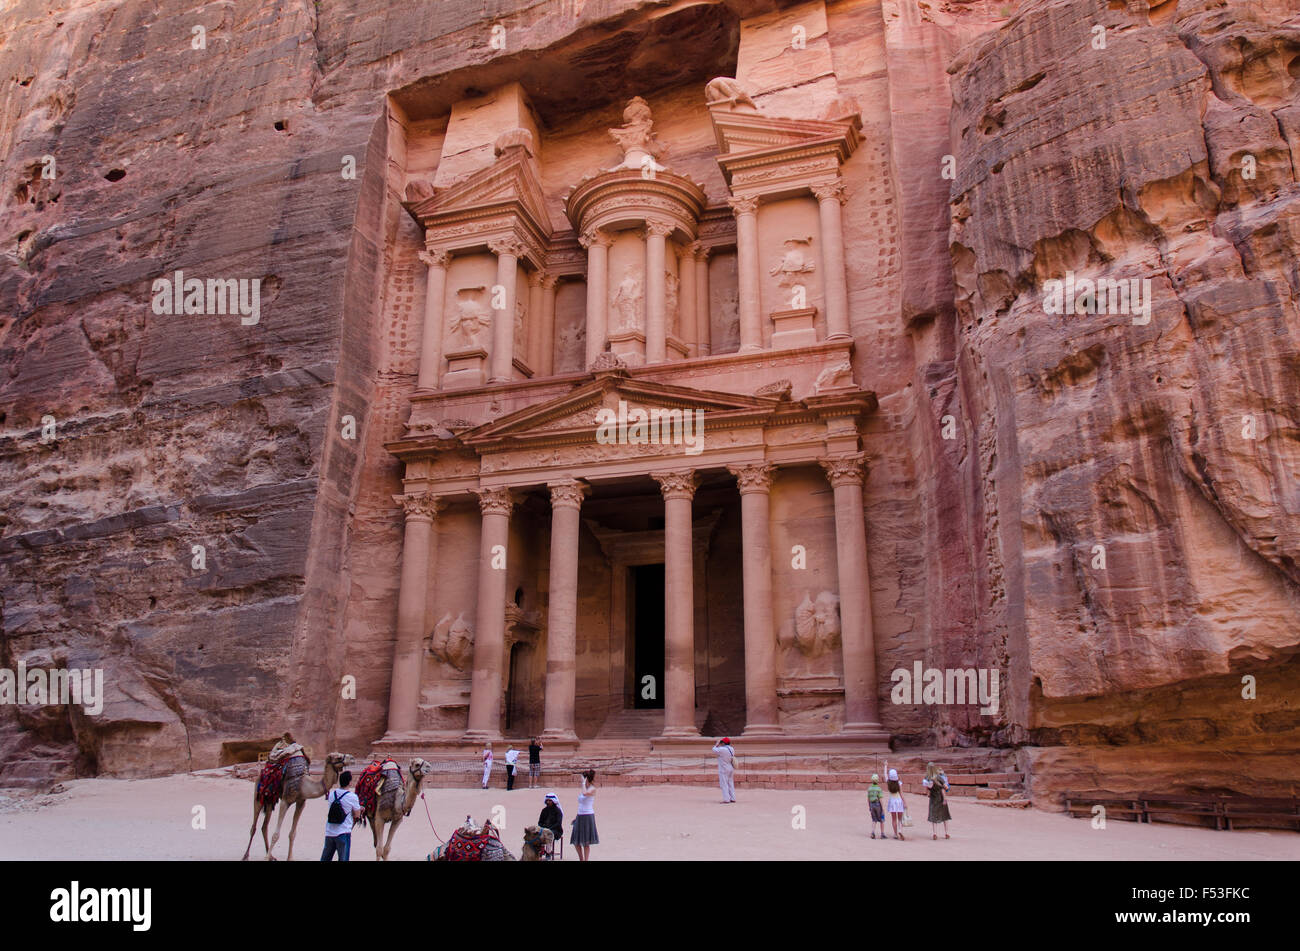 resting in front of the entrance to Petra, Stock Photo